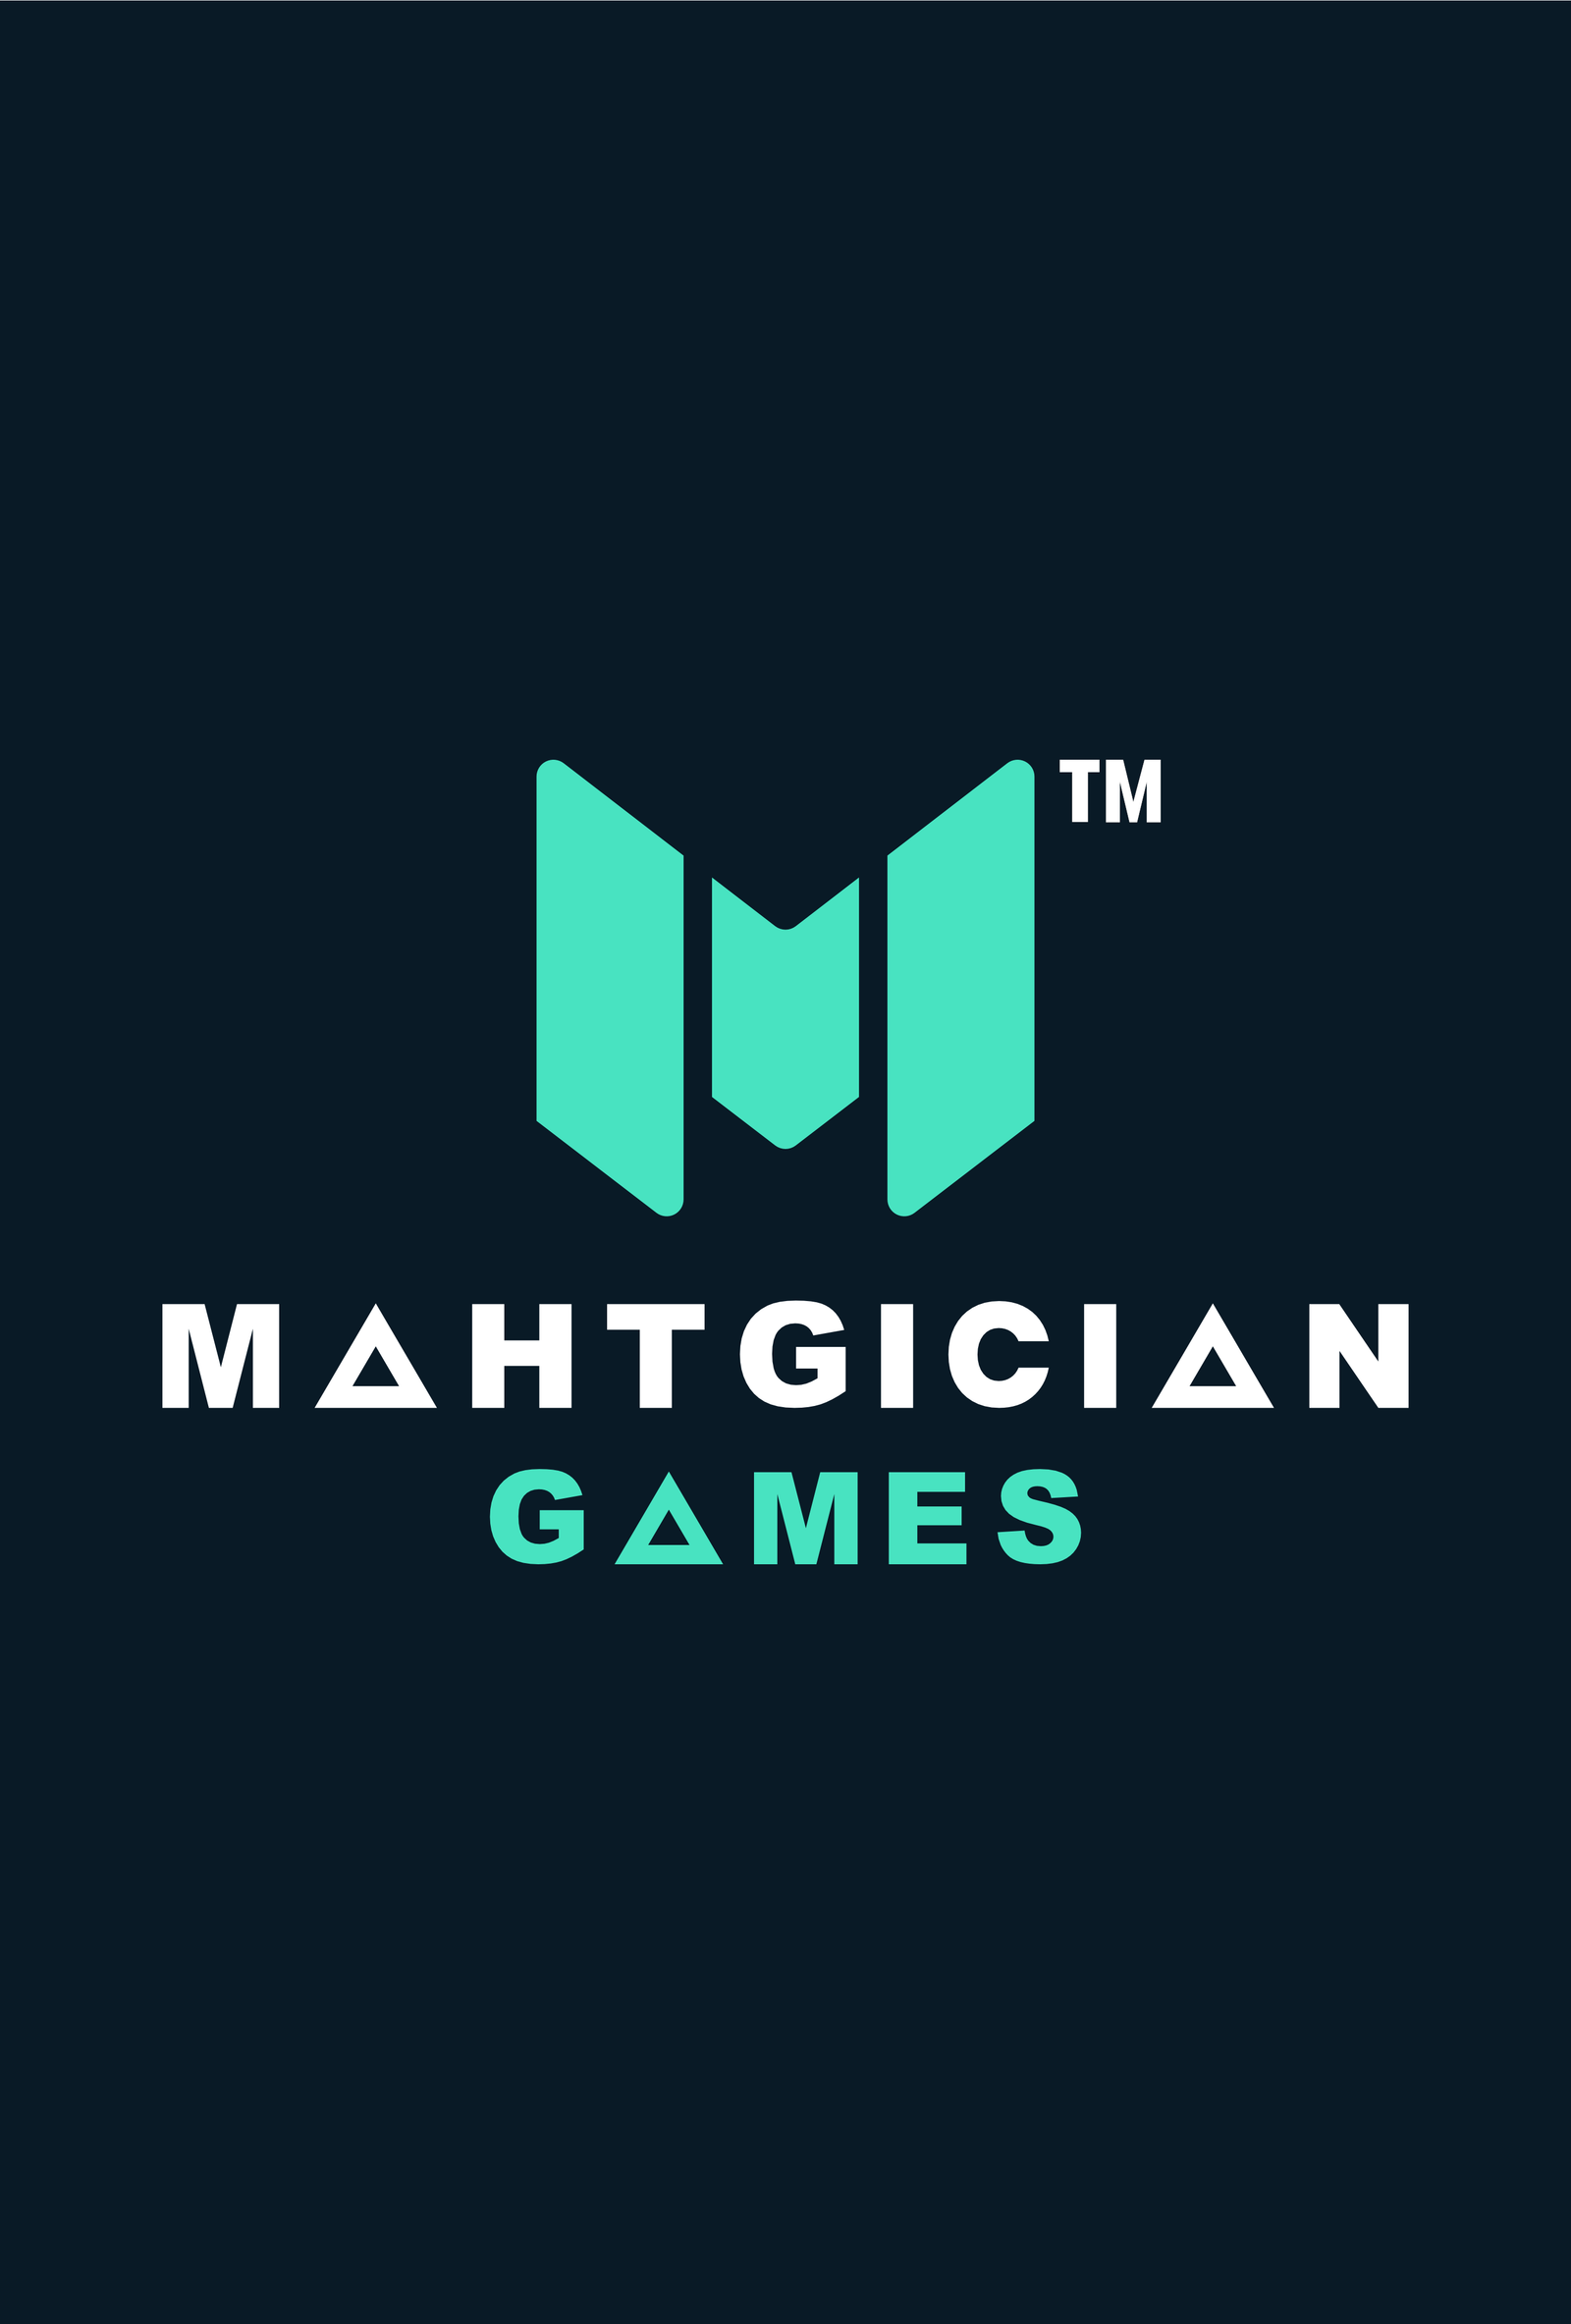 Mahtgician Games, LLC | About Us - The Name